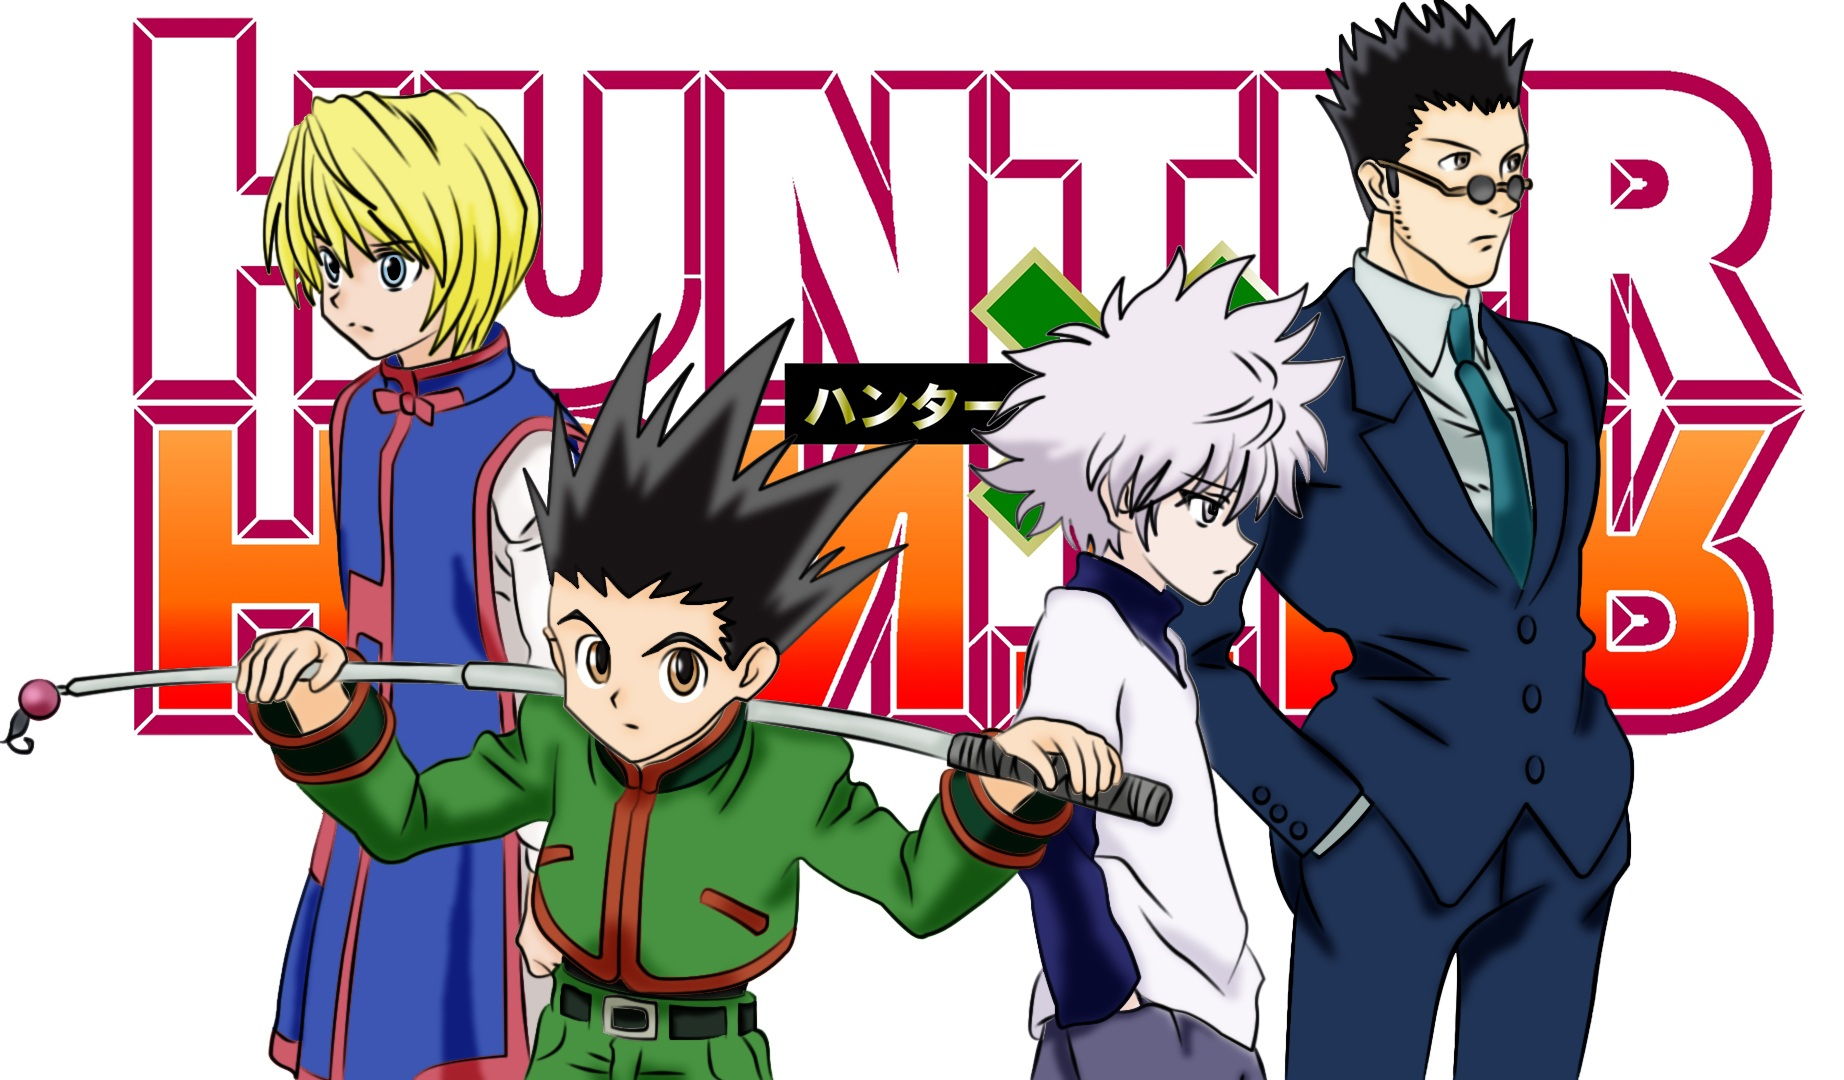 2011 Anime and Manga Observations and Comparisons 6 : r/HunterXHunter